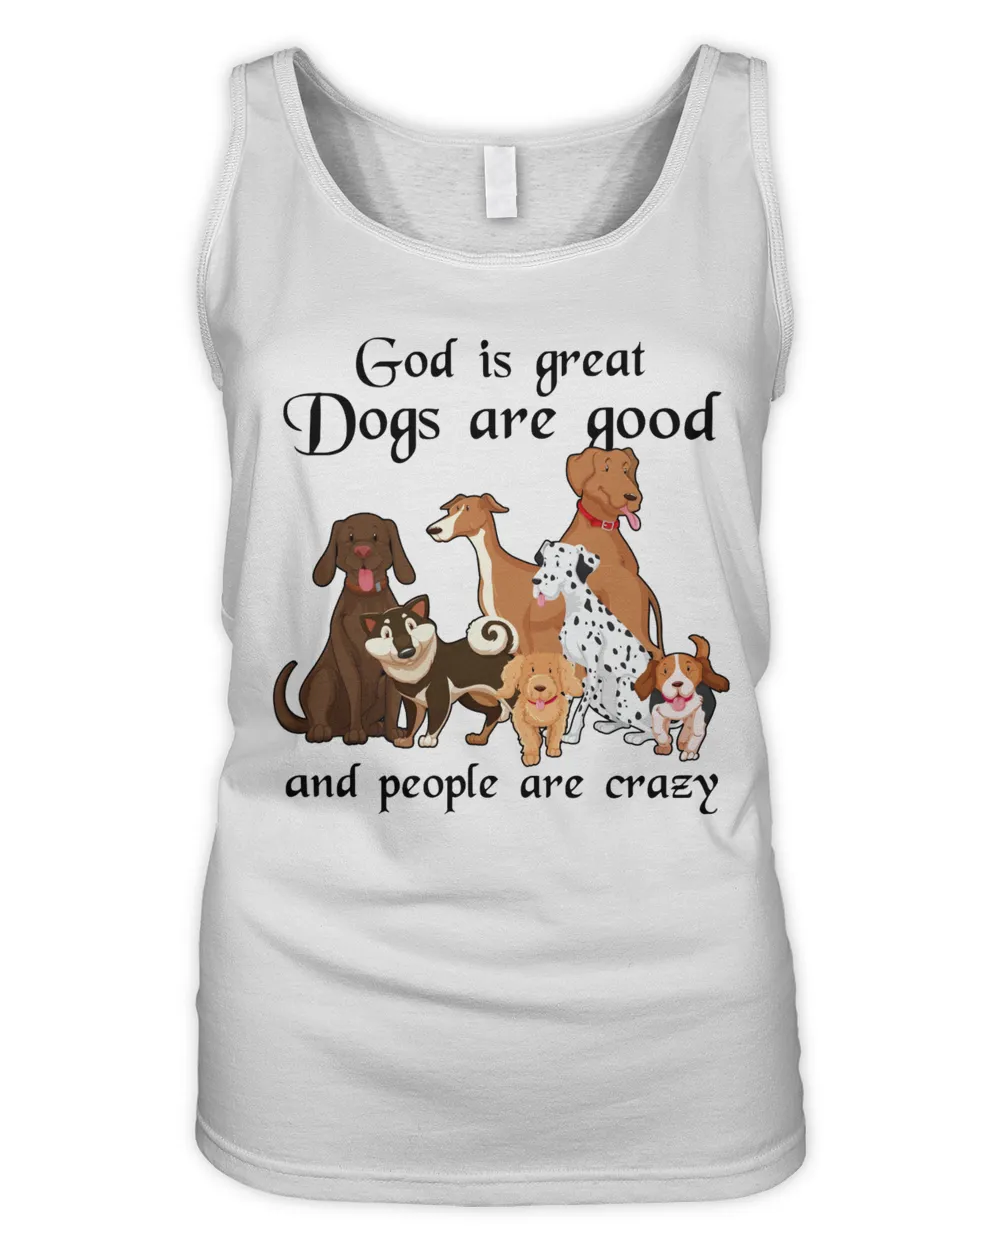 God is great, Dogs are good and people are crazy